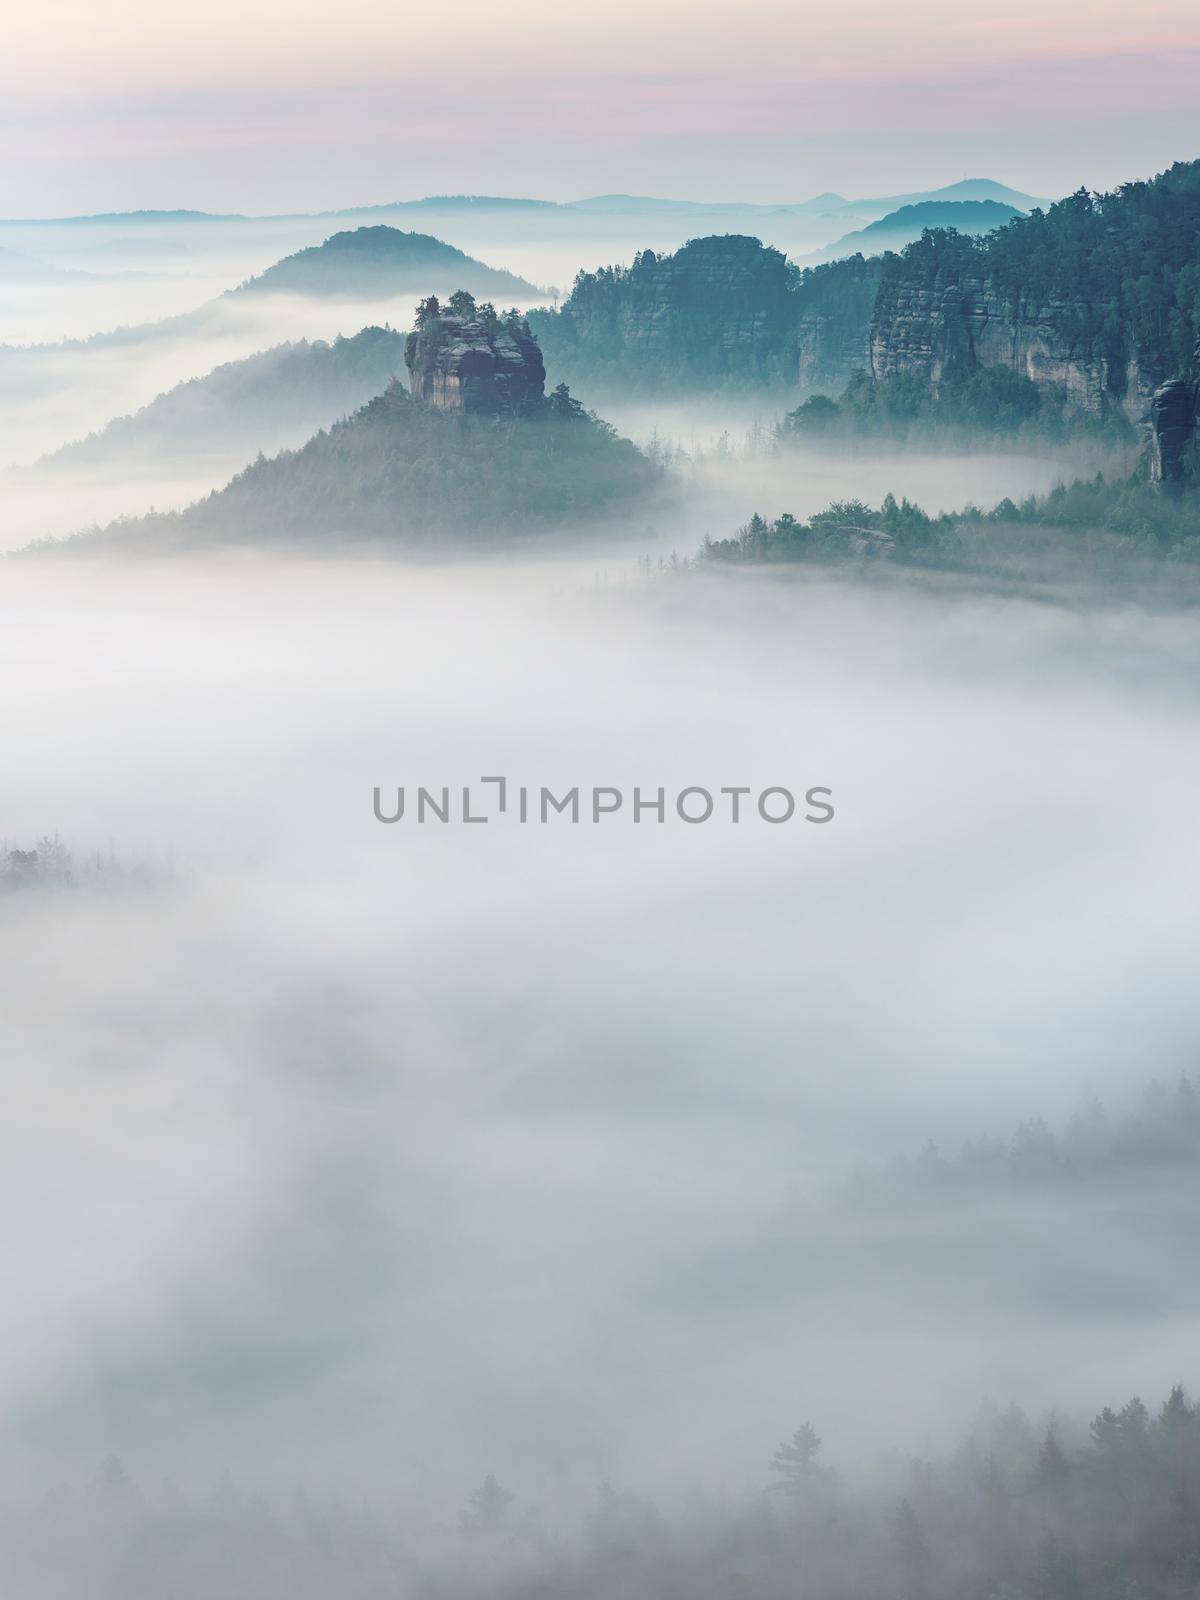 The fairy rock of Winterstein, also called Hinteres Raubschloss or Raubstein sticking out of morning mist.  It is a sandstone rock massif, the butte with rest of stronghold ruin in the Saxon Switzerland National Park.